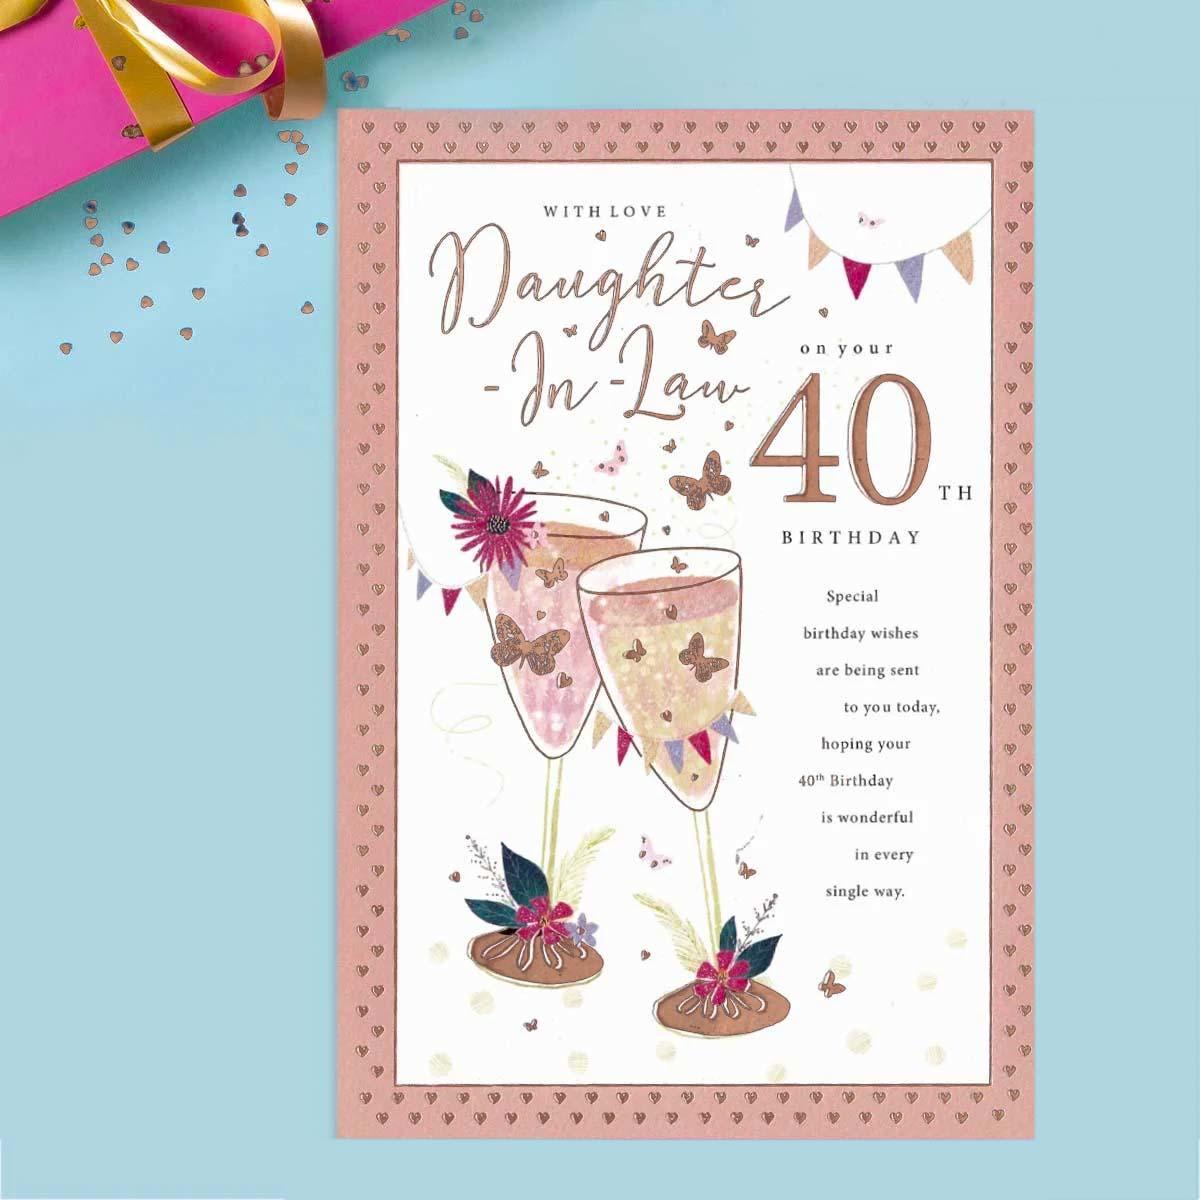 Daughter In Law Age 40 Birthday Card Front Image